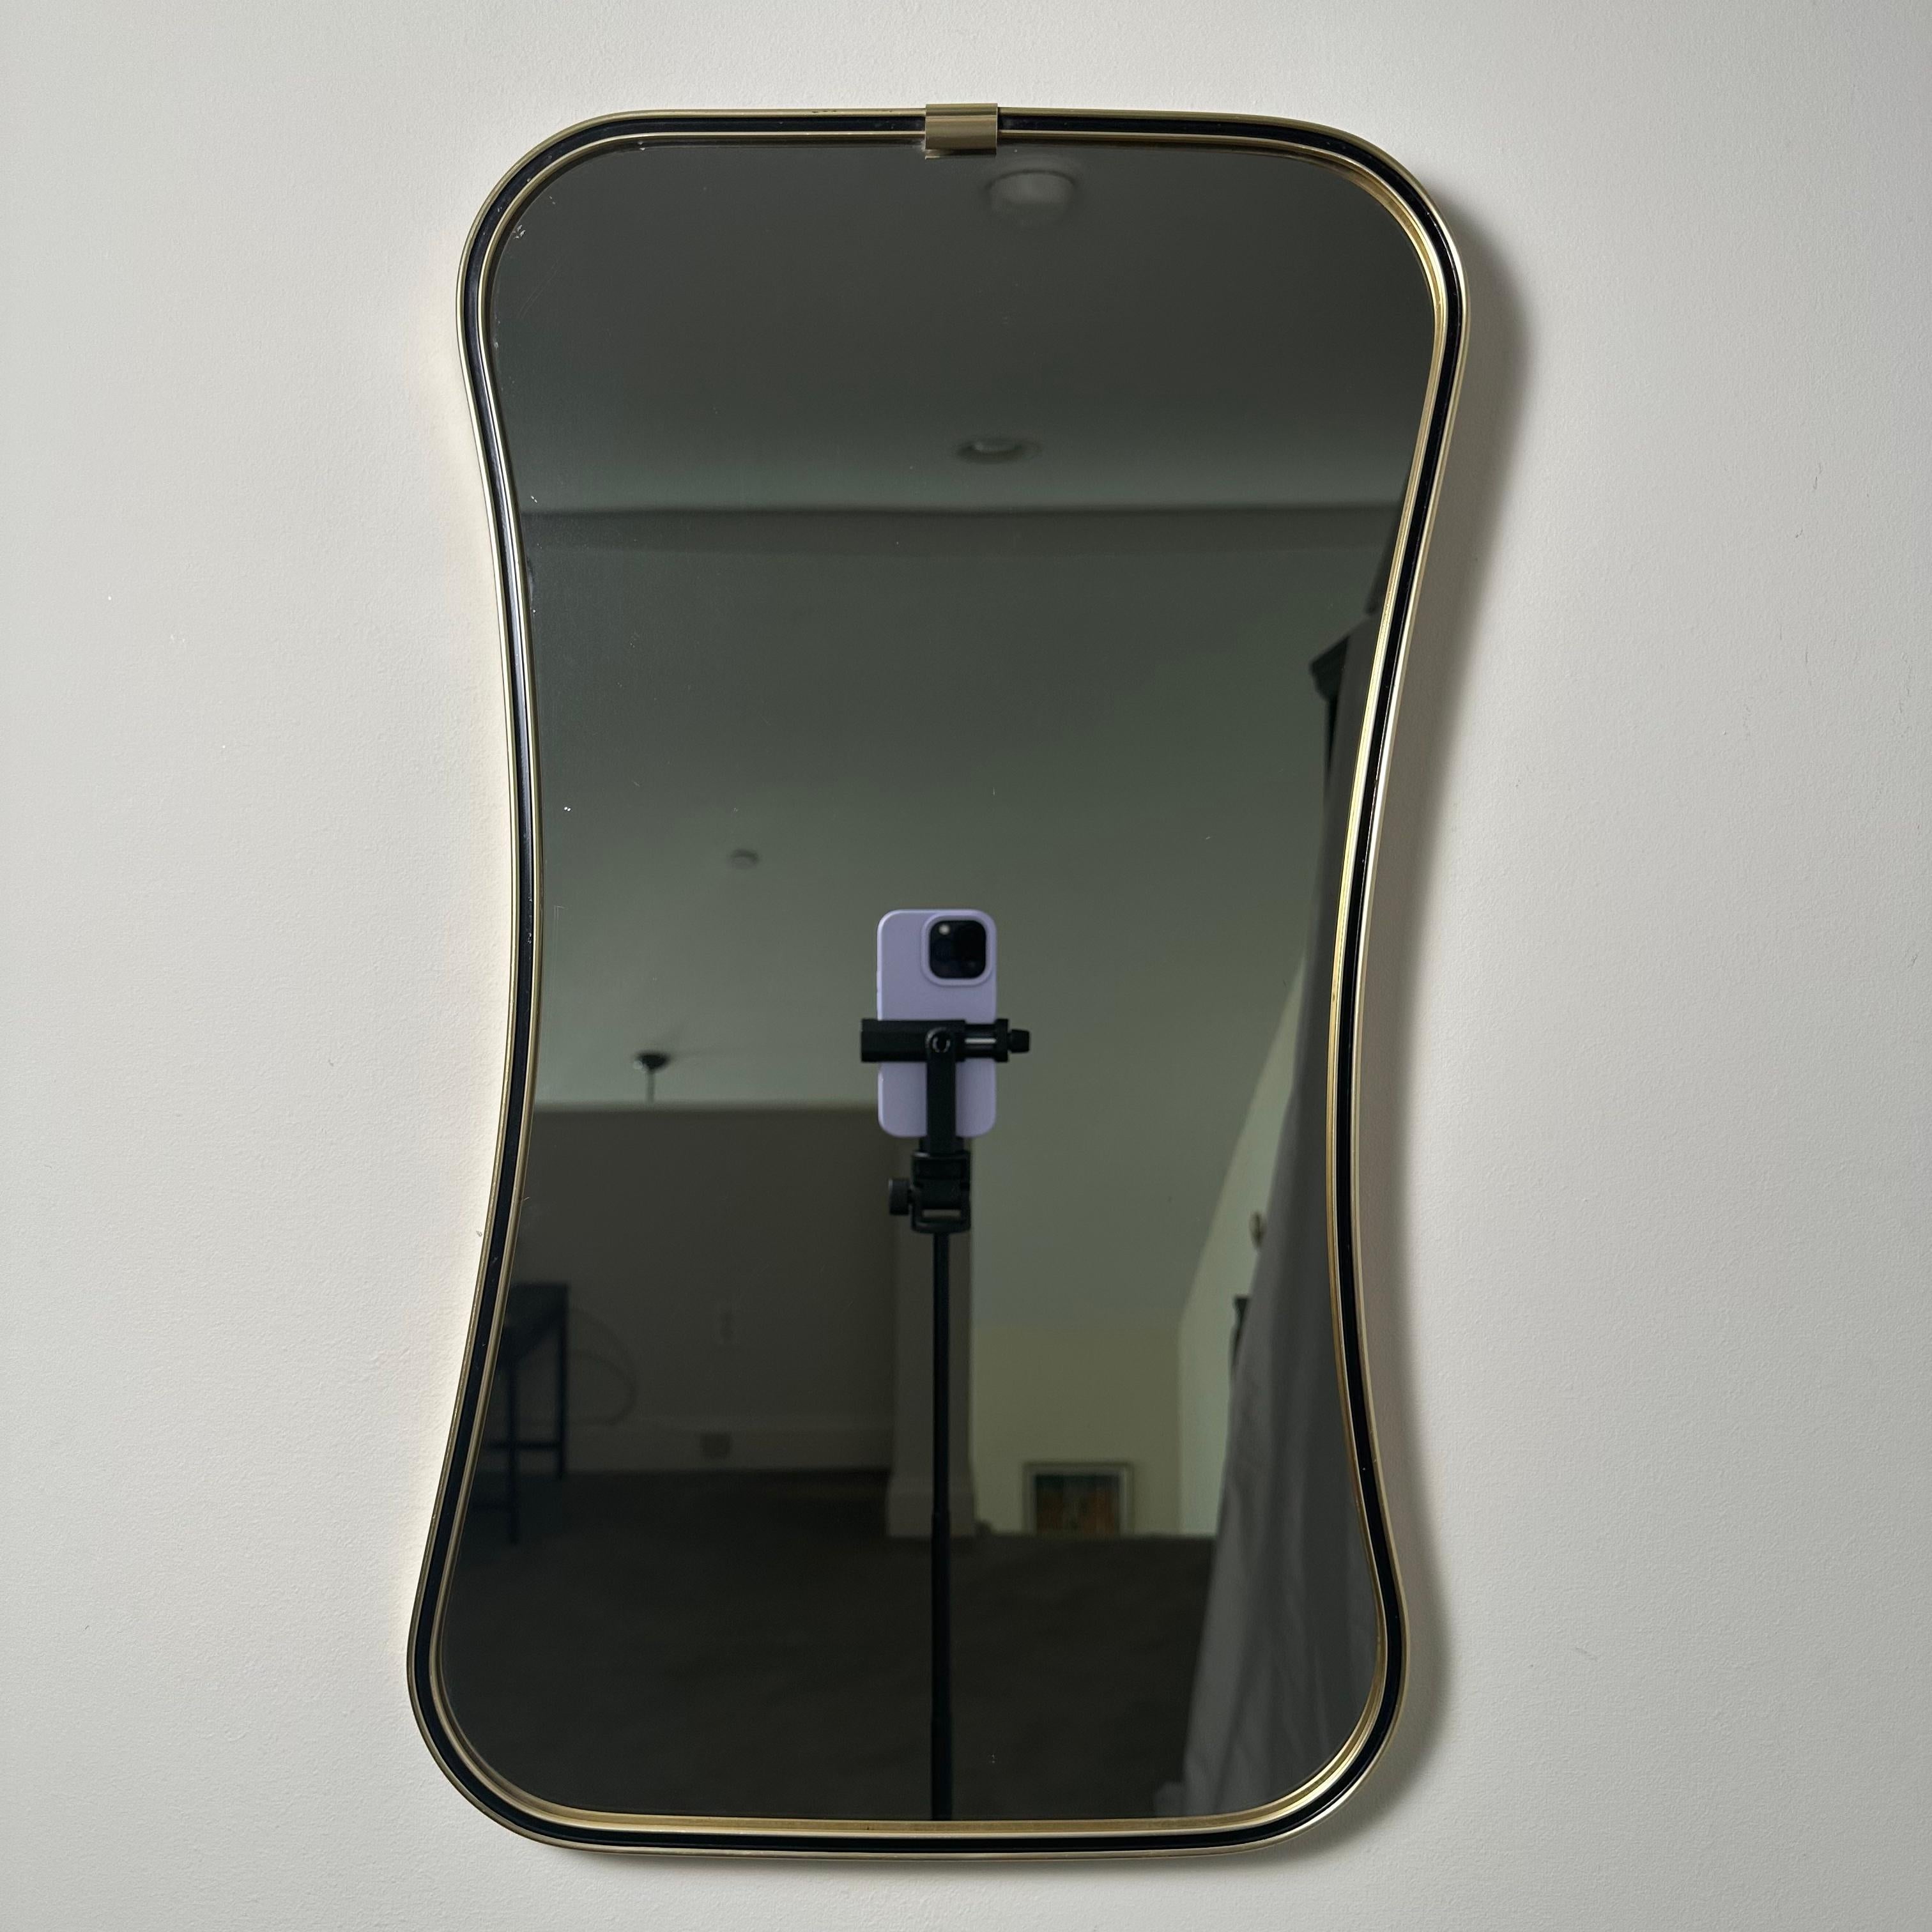 Vintage Italian Mid-Century Modern hanging wall mirror framed in brass with black enamel or lacquer border surround. Featuring a gorgeous and unique asymmetrical near-hourglass shape. While looking at first glance like an hourglass shape, the curves